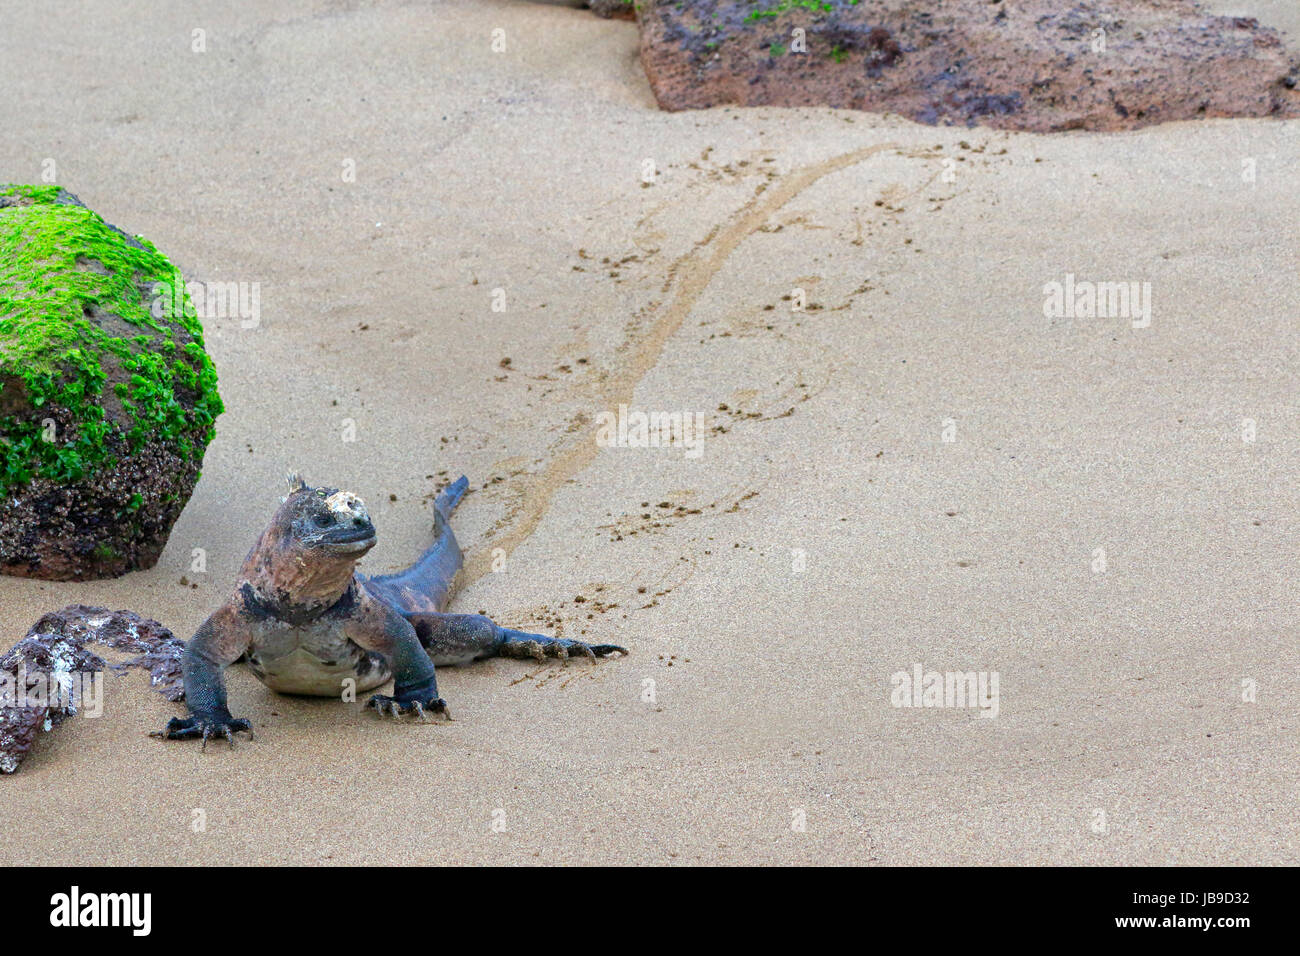 Marine Iguana walking on a sandy beach showing its tracks in the Galapagos Stock Photo